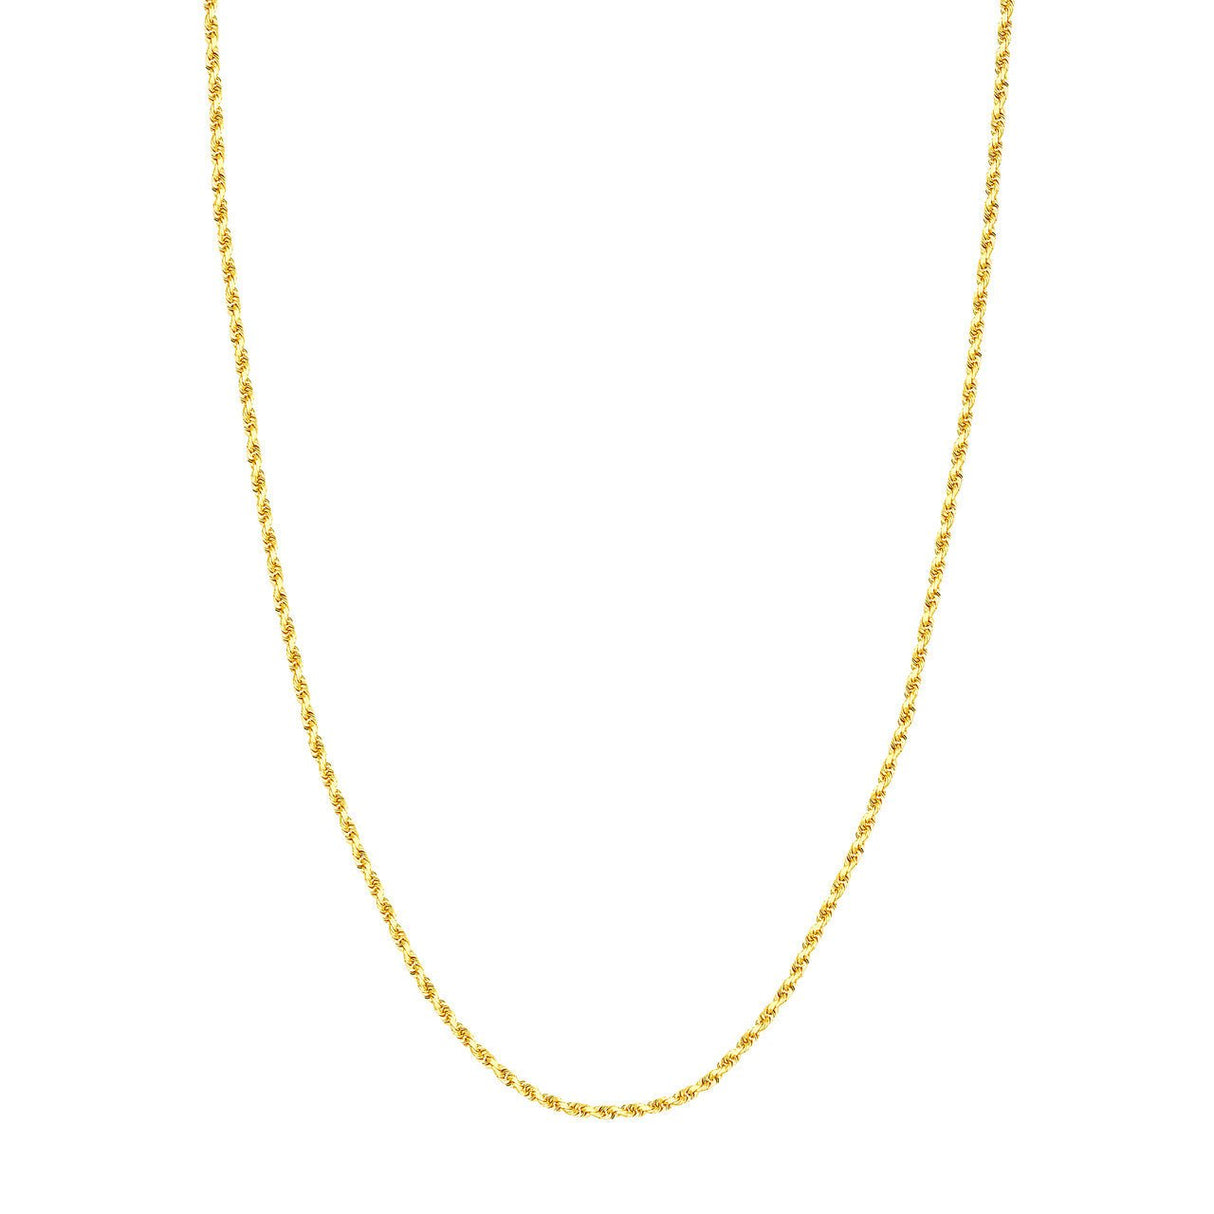 14K Gold Chain, 24", 2.3mm D/C Rope Chain with Lobster Lock, Gold Layered Chain, Gold Necklace, - Diamond Origin